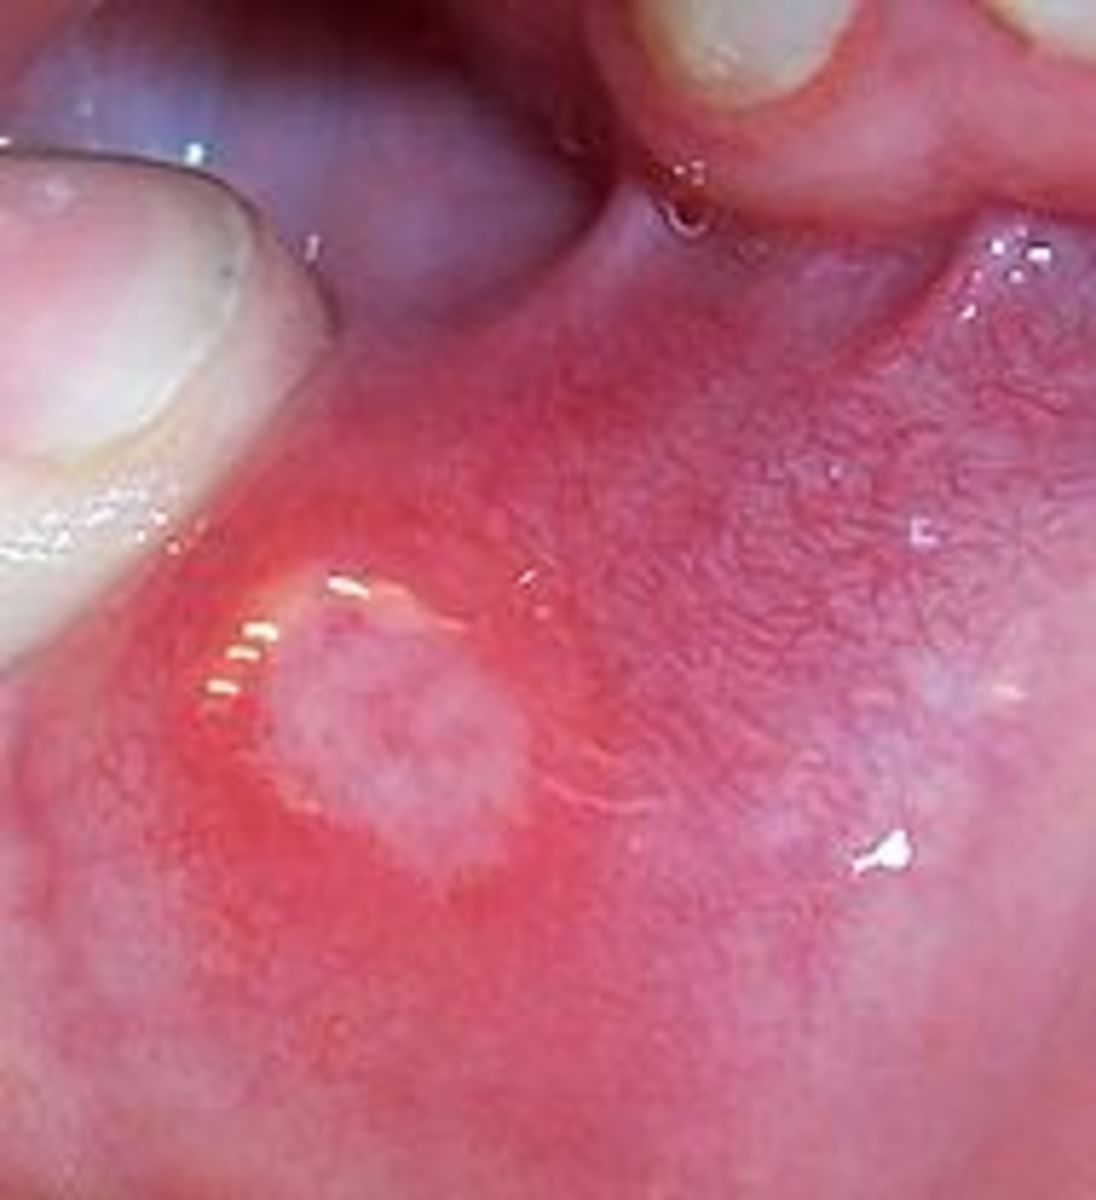 Symptoms and Home Remedies For Mouth Ulcers